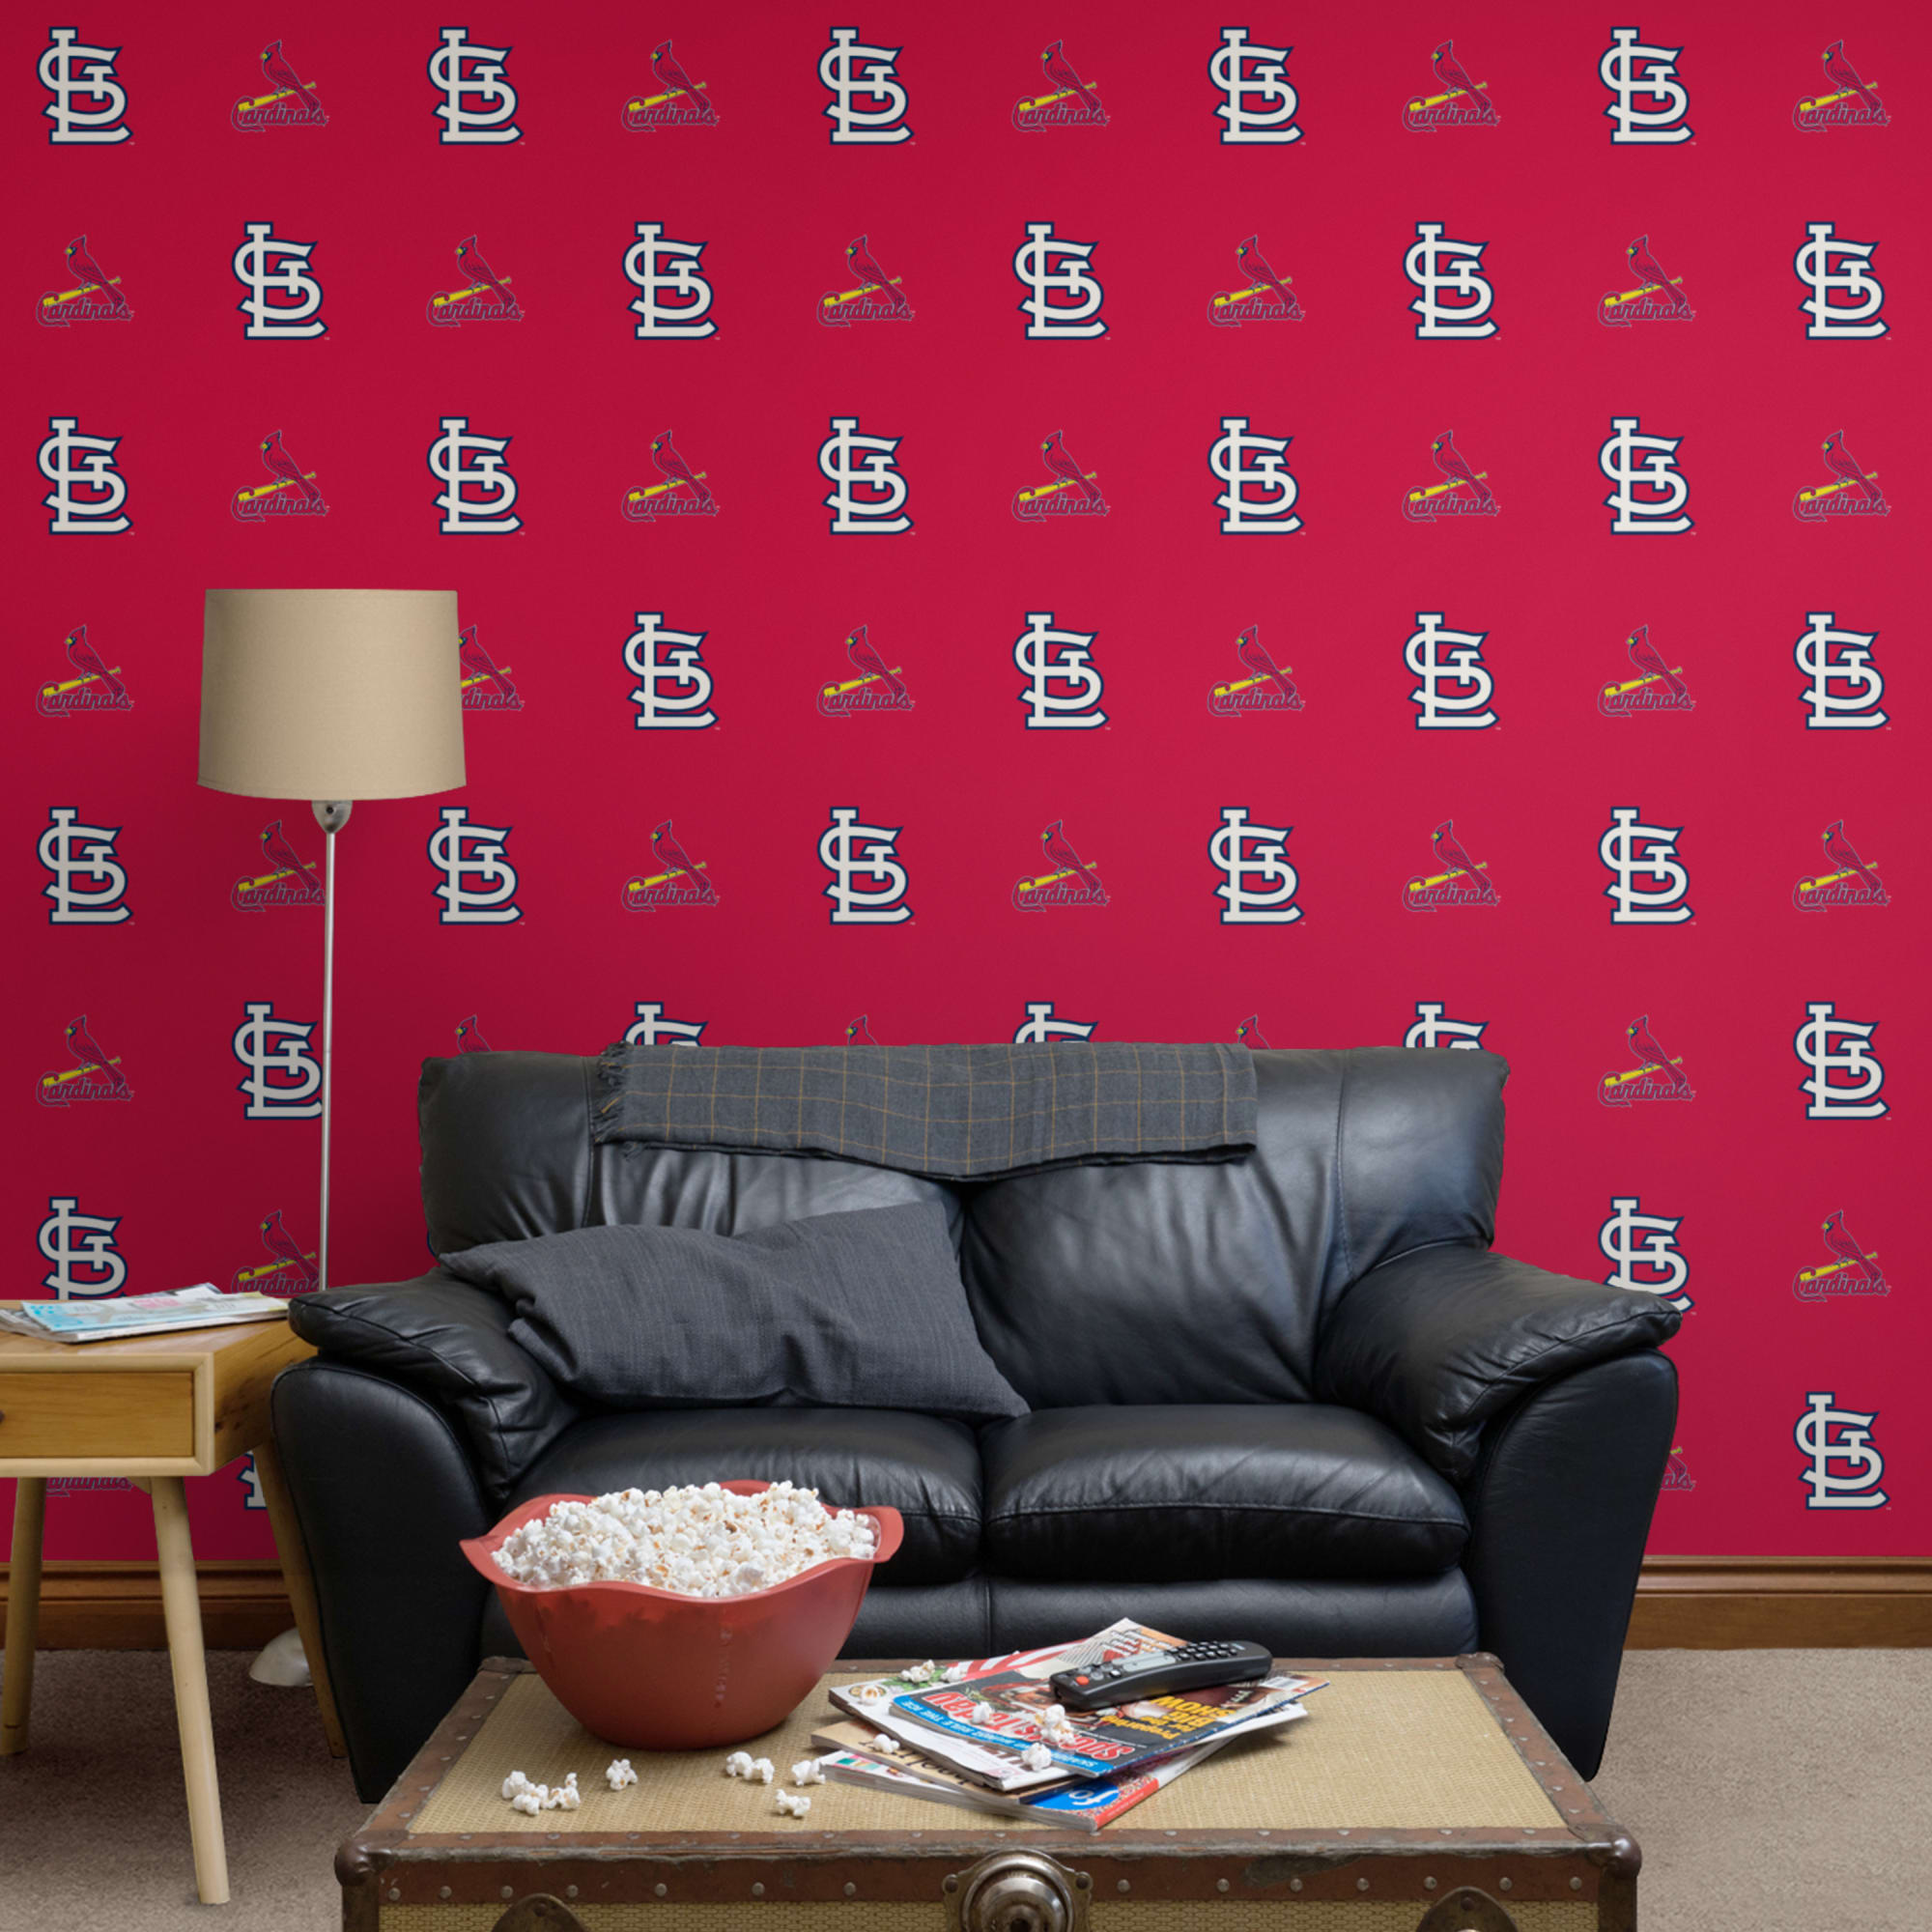 St. Louis Cardinals: Logo Pattern - Officially Licensed Removable Wallpaper 12" x 12" Sample by Fathead